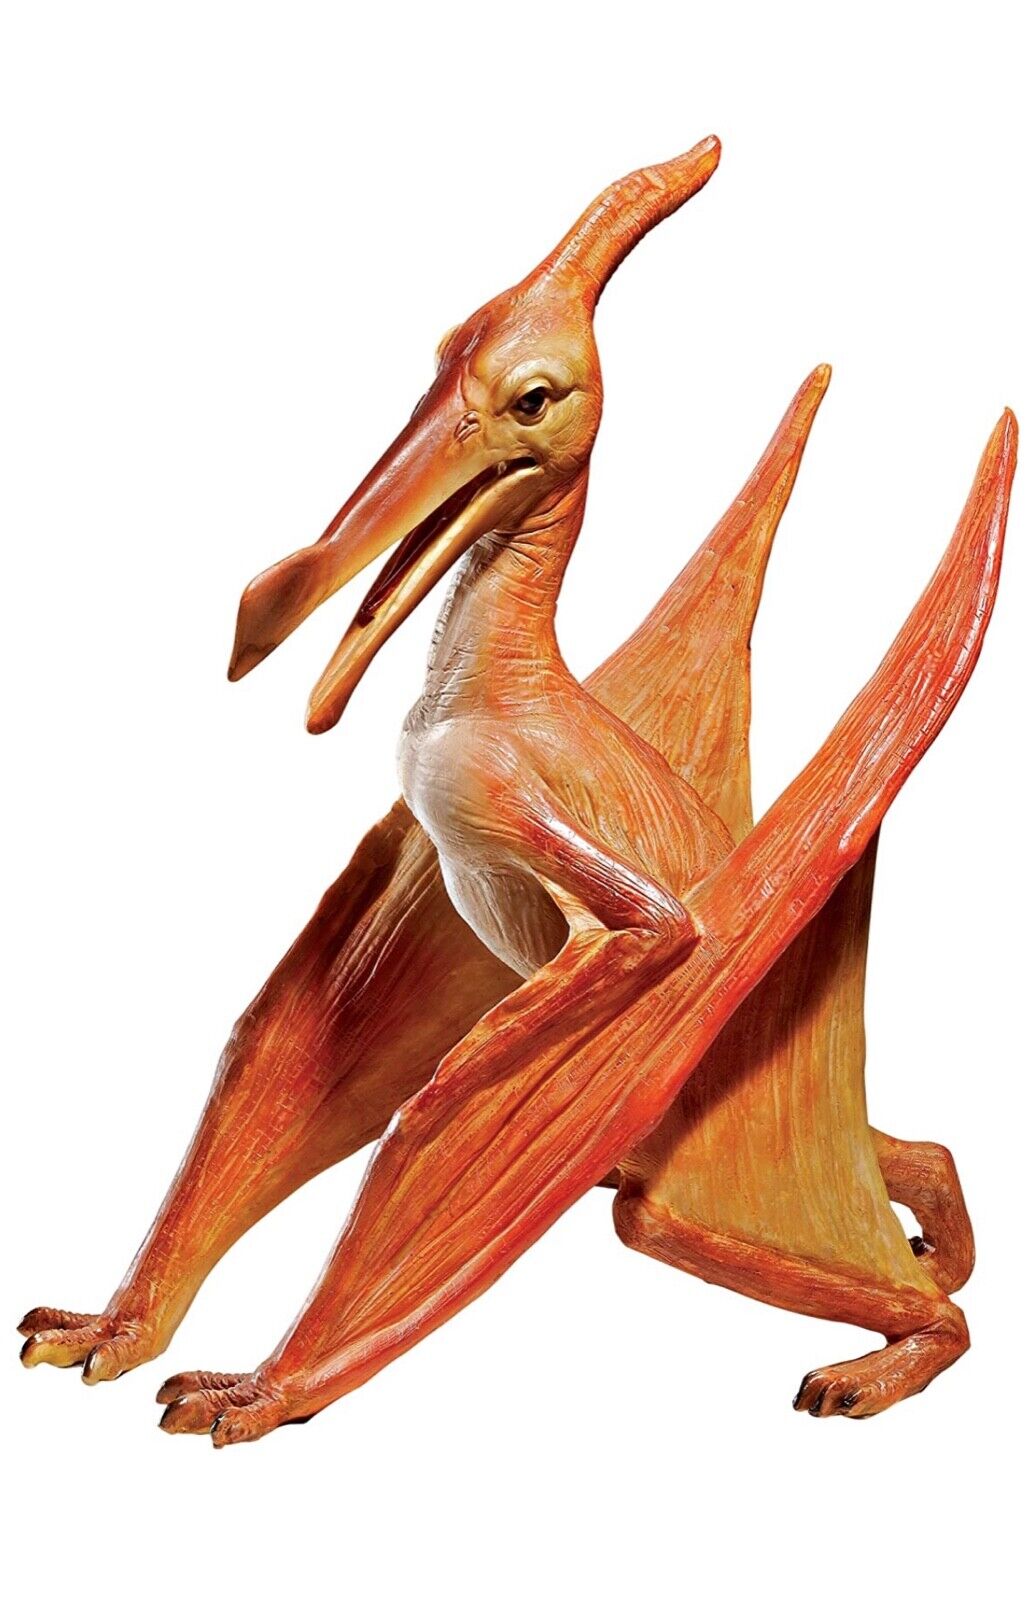 Scaled Dinosaur Statue Jurassic Period Pterodactyl 6.5 x 11.5 x 14 inches (a)